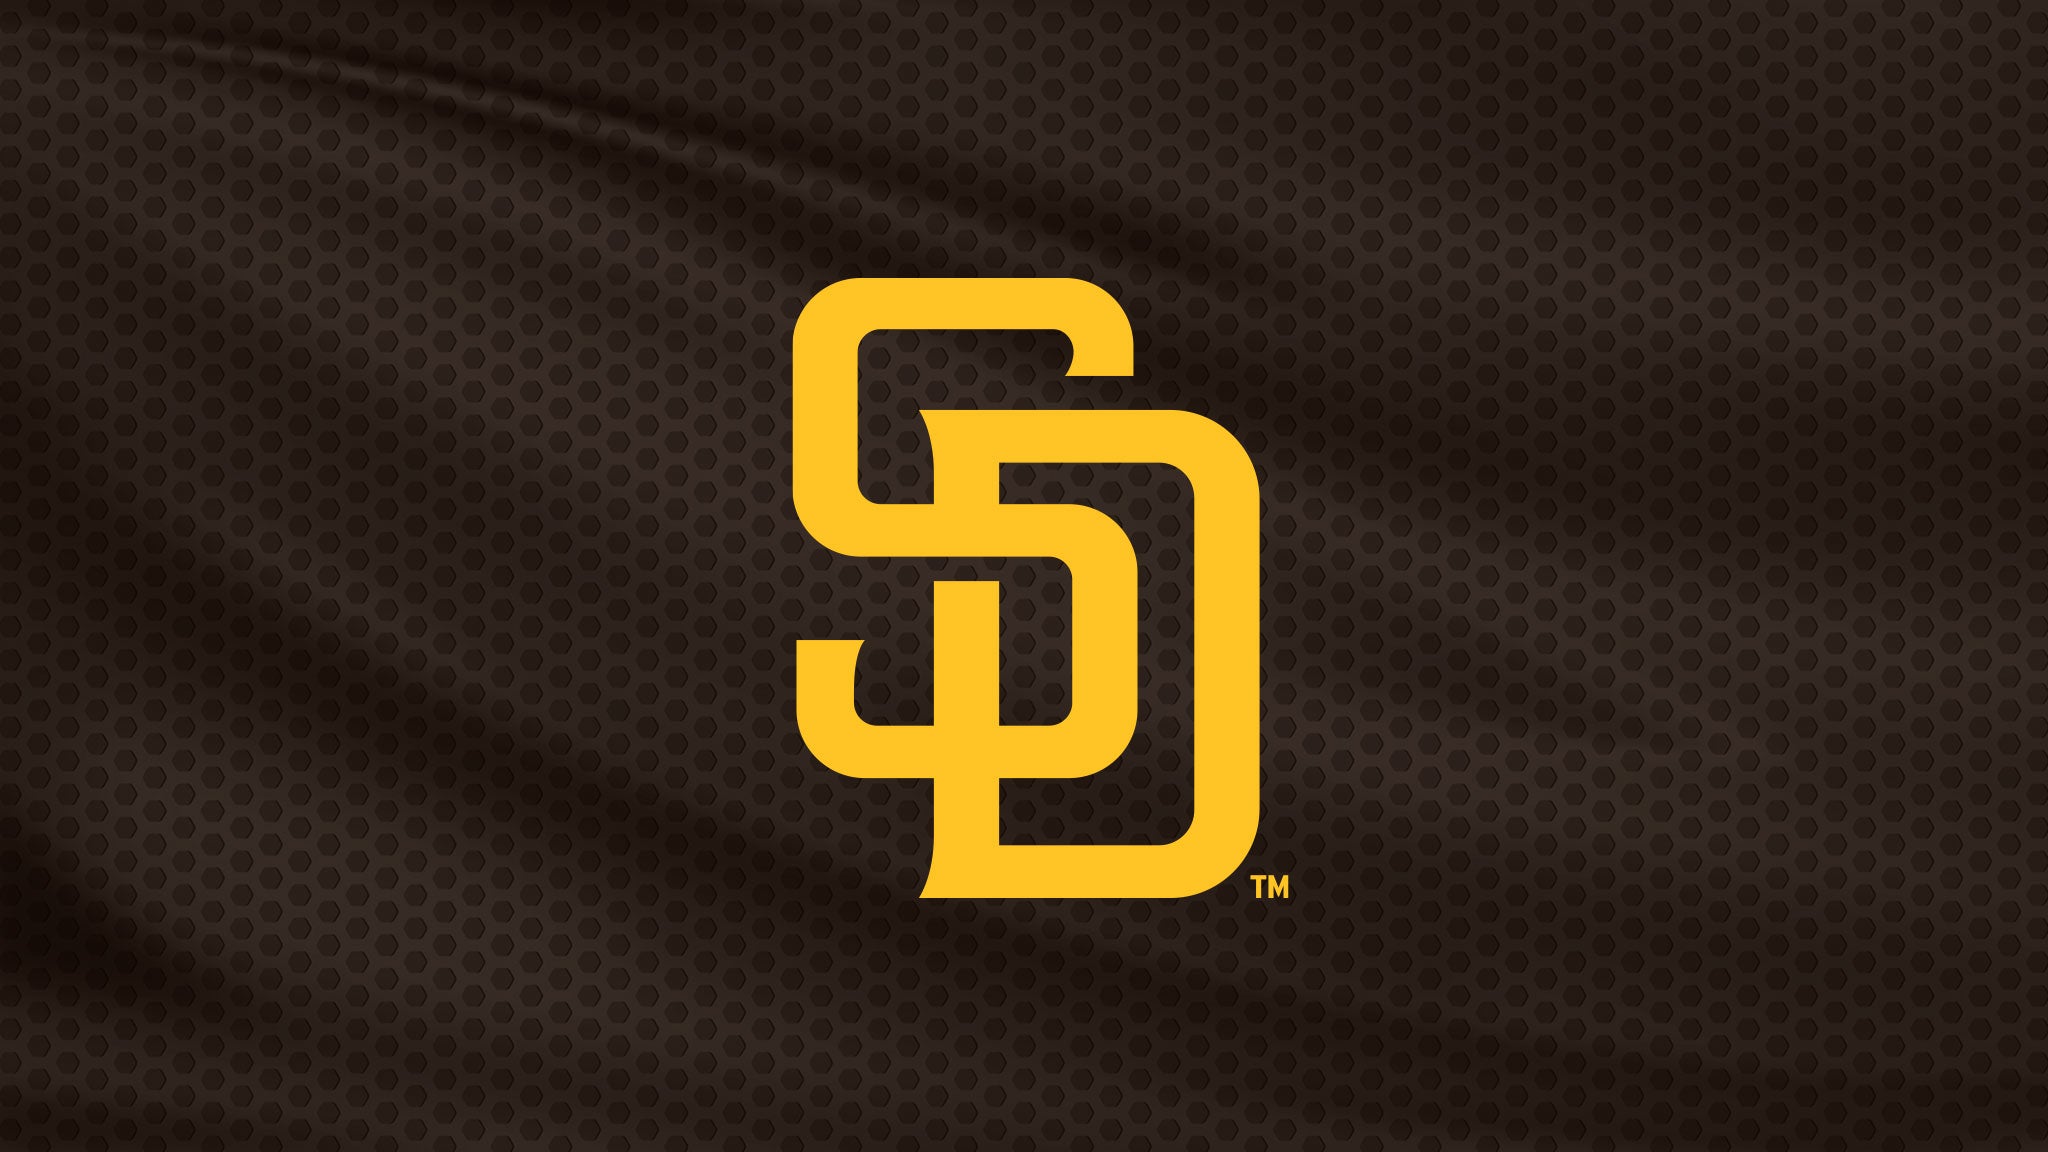 exclusive presale code for San Diego Padres vs. Seattle Mariners Exhibition Game advanced tickets in San Diego at Petco Park